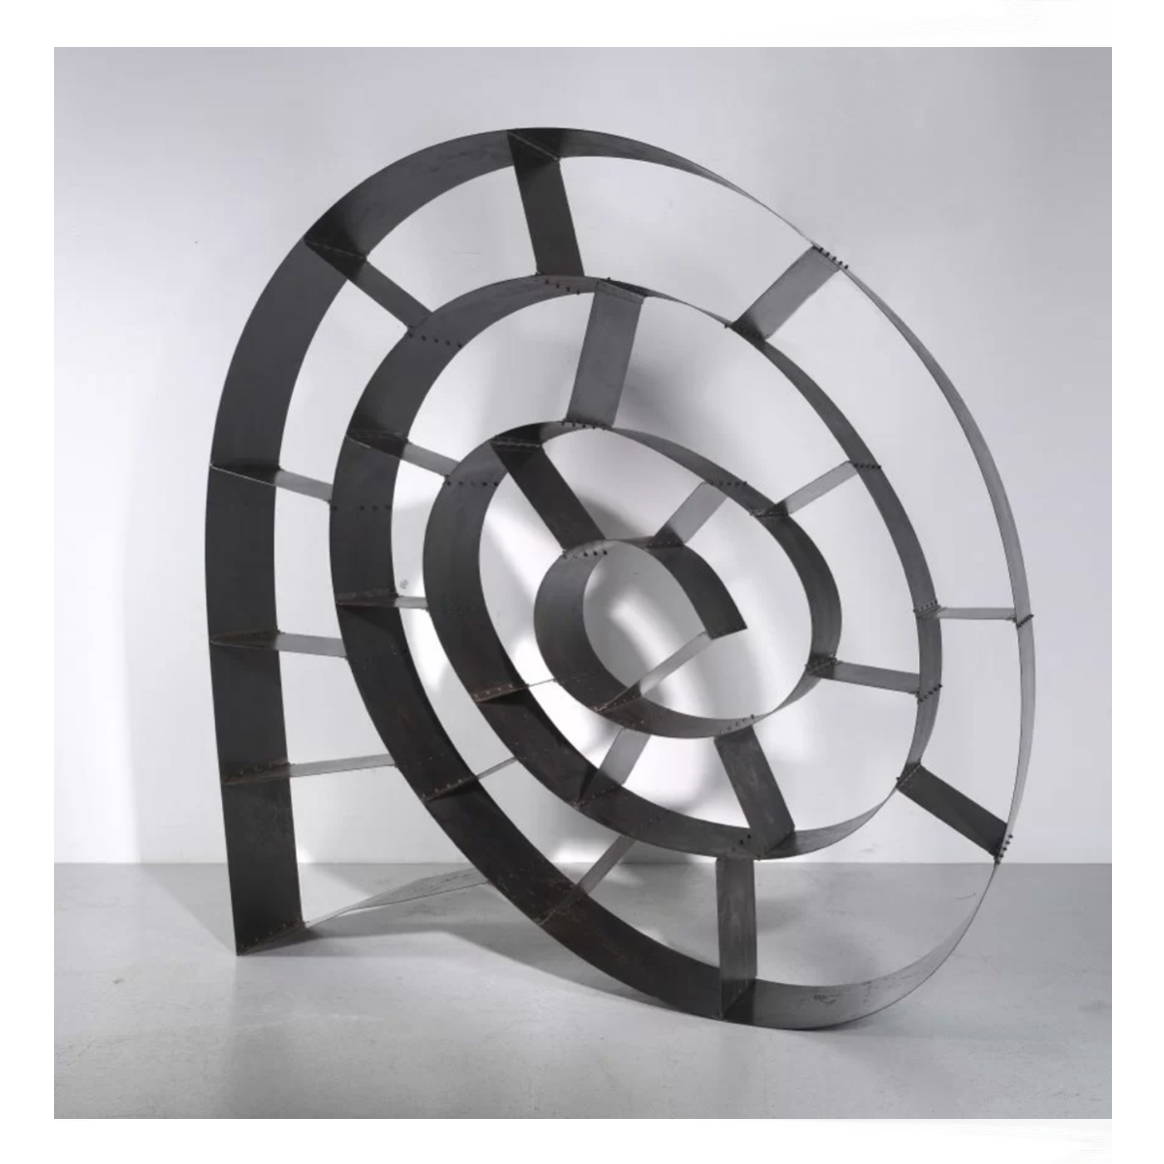 prototype of This Mortal Coil bookshelf by Ron Arad